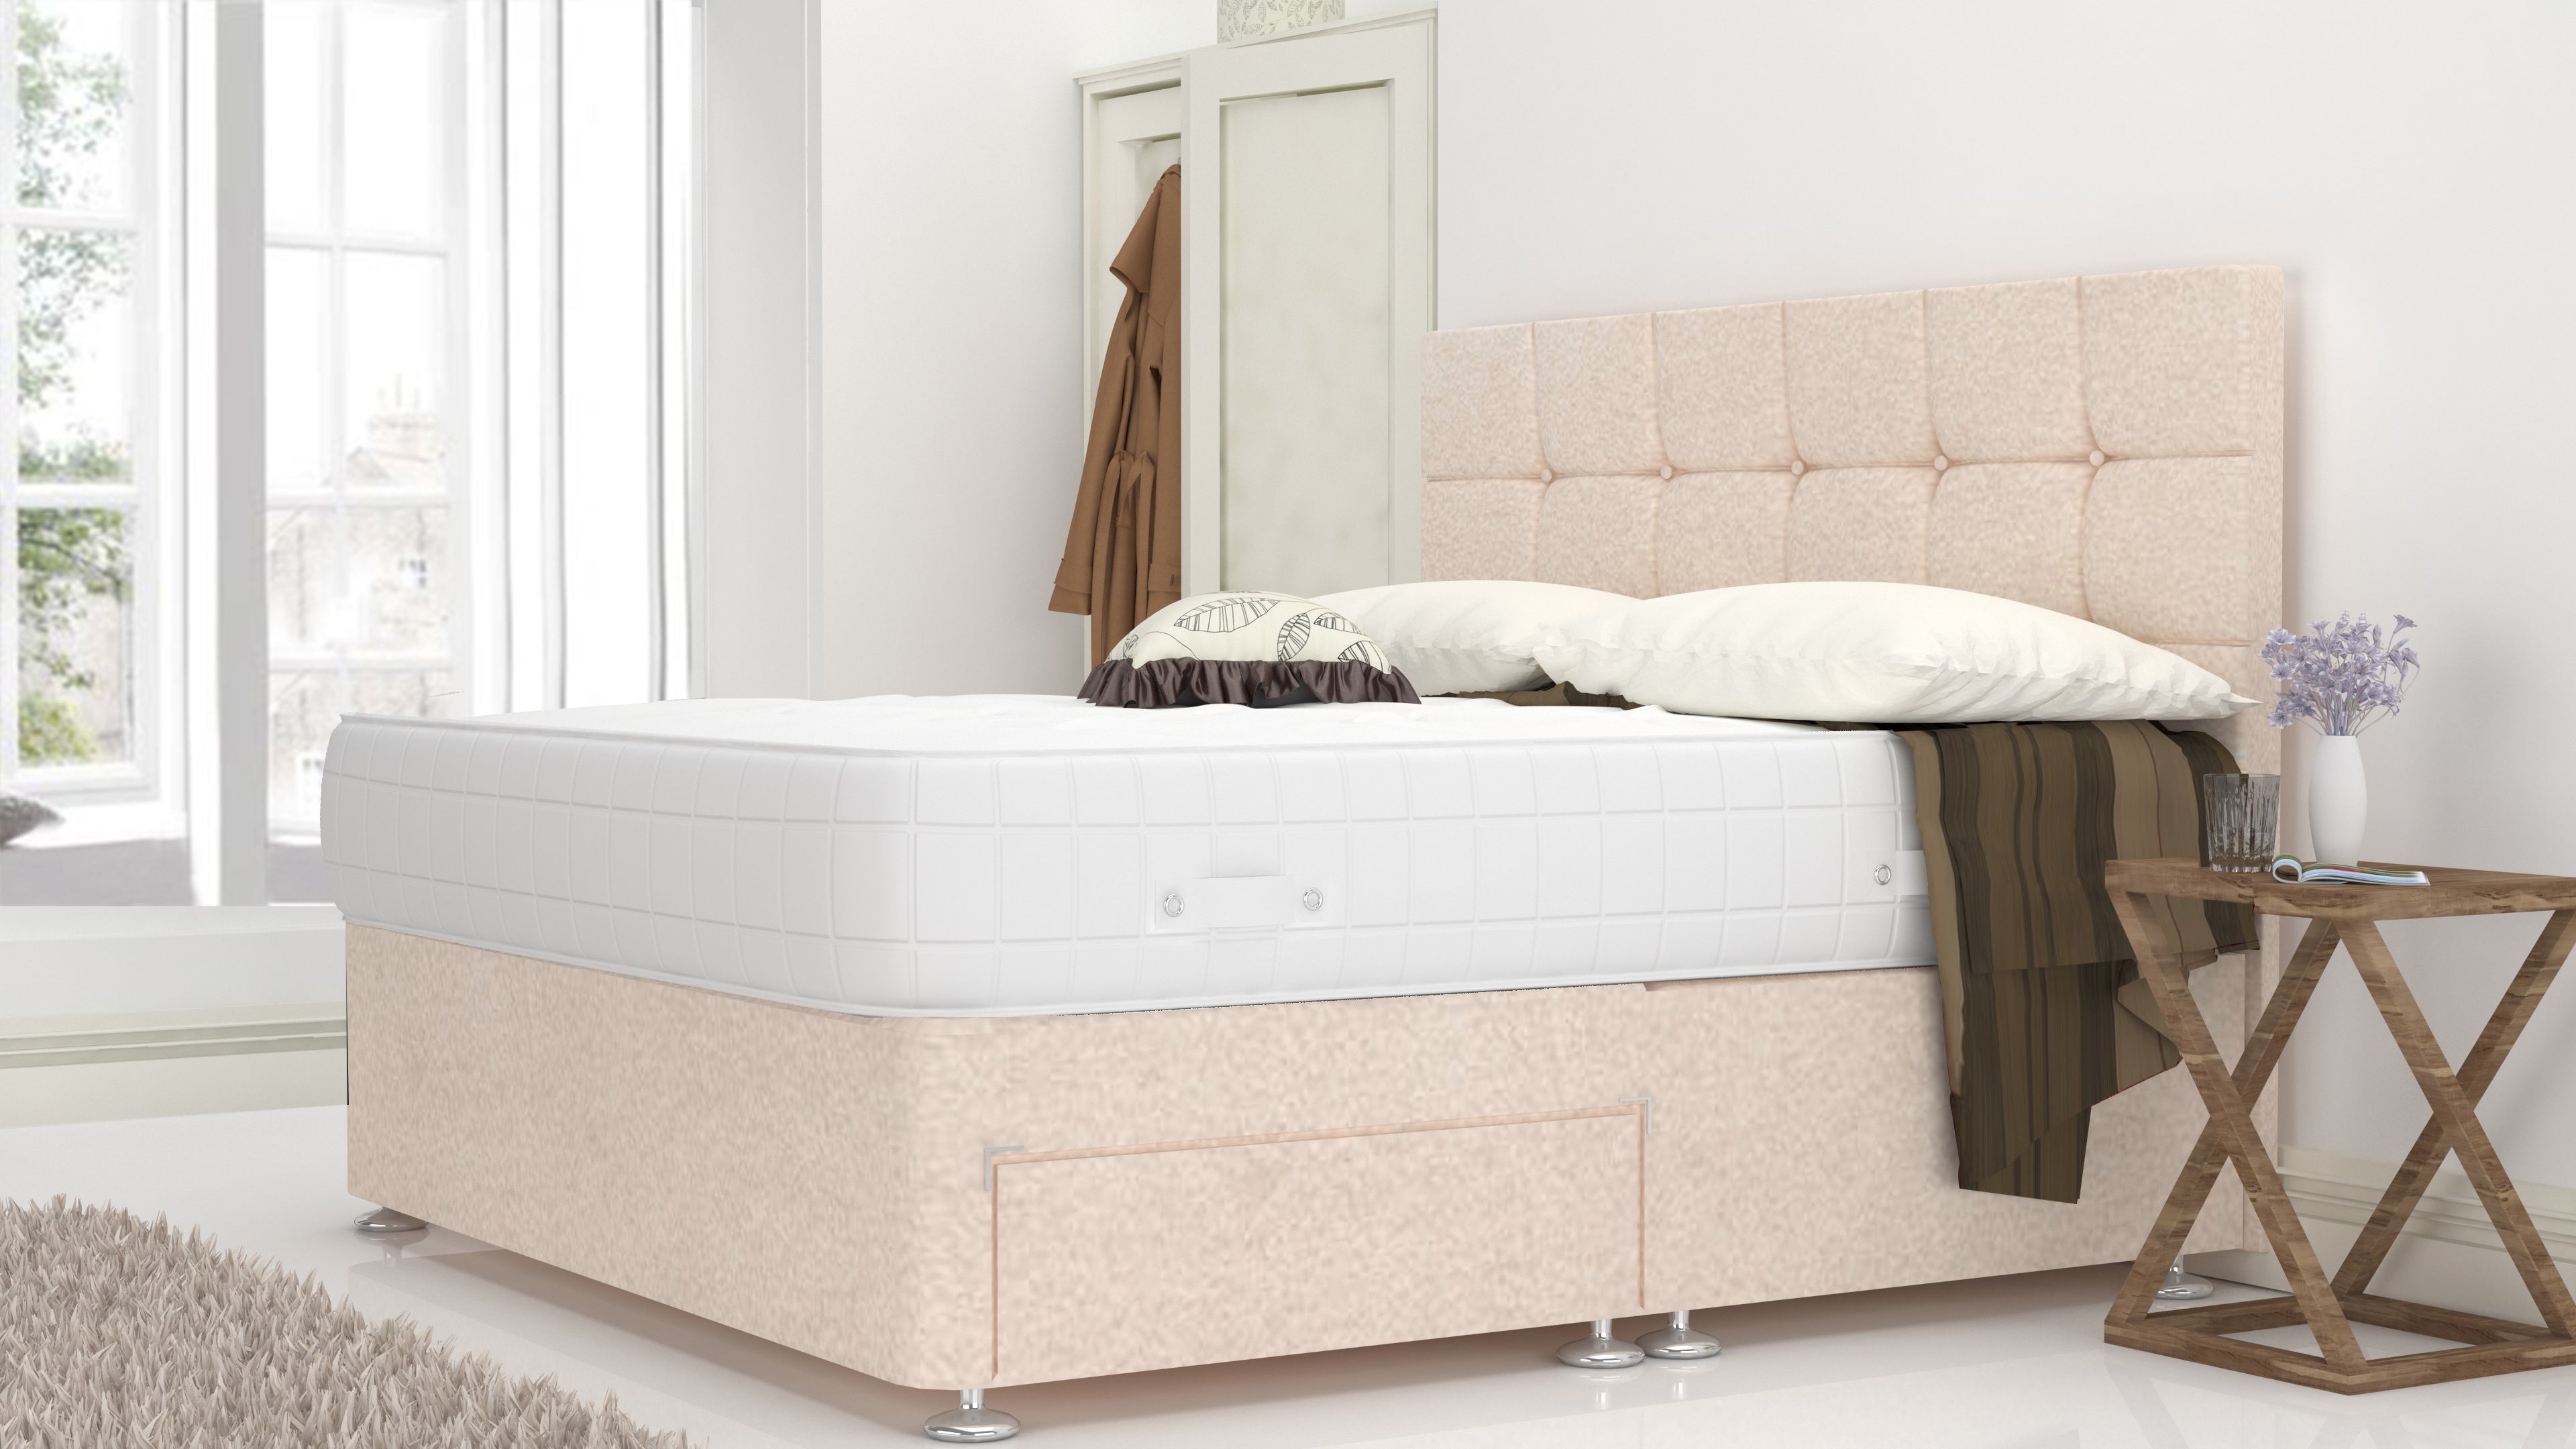 Cream Chanille 5 Feet Divan Bed Set With Cube Headboard (Included Feet) And Free Orthopedic Mattress